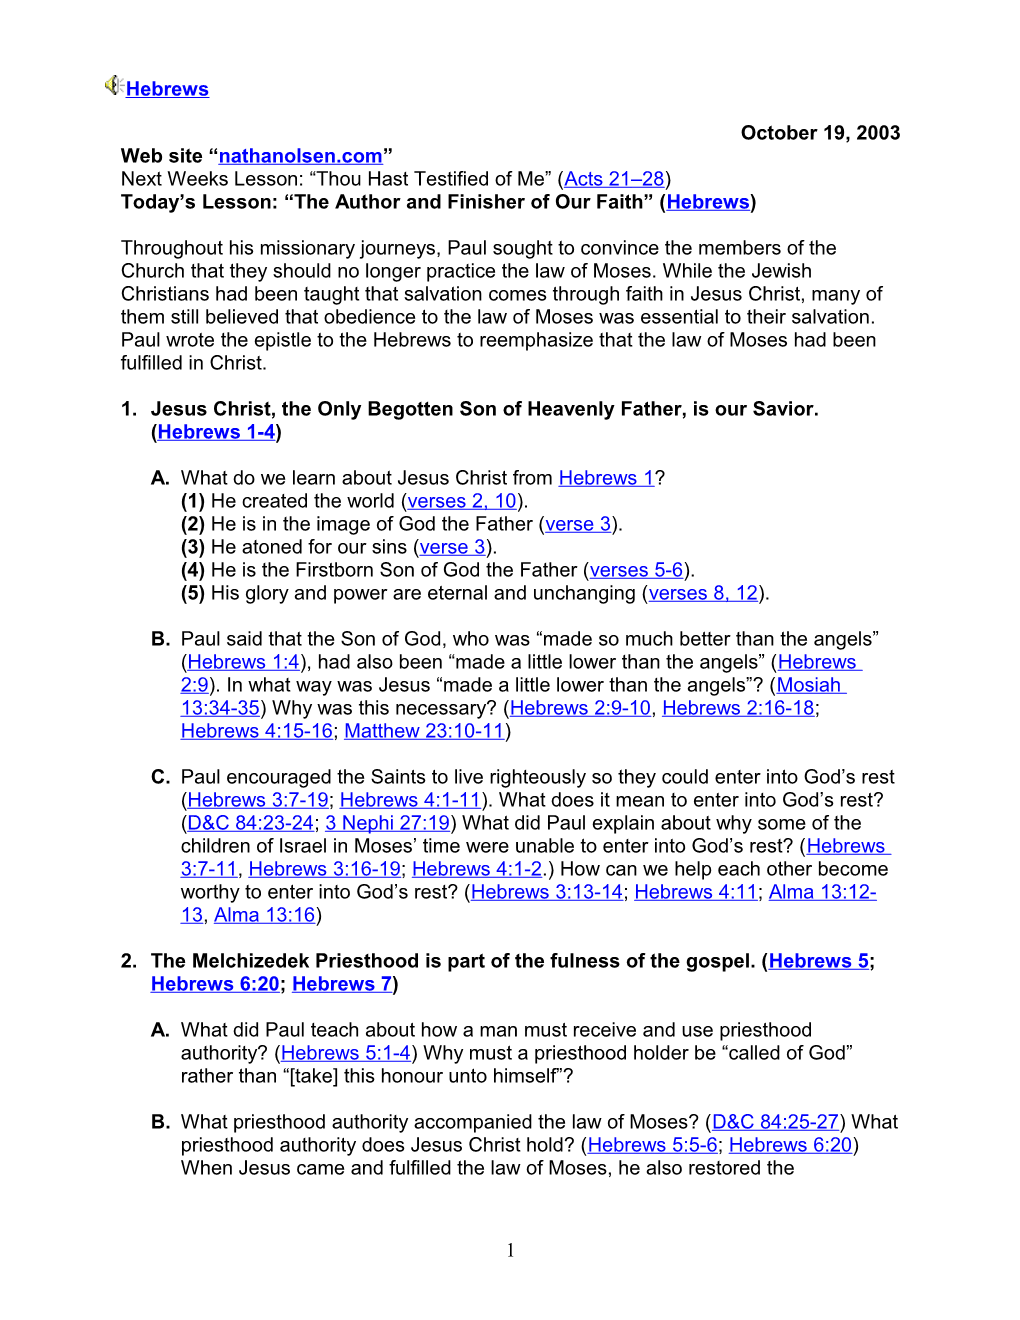 Web Site Nathanolsen.Com Next Weeks Lesson: Thou Hast Testified of Me (Acts 21 28)